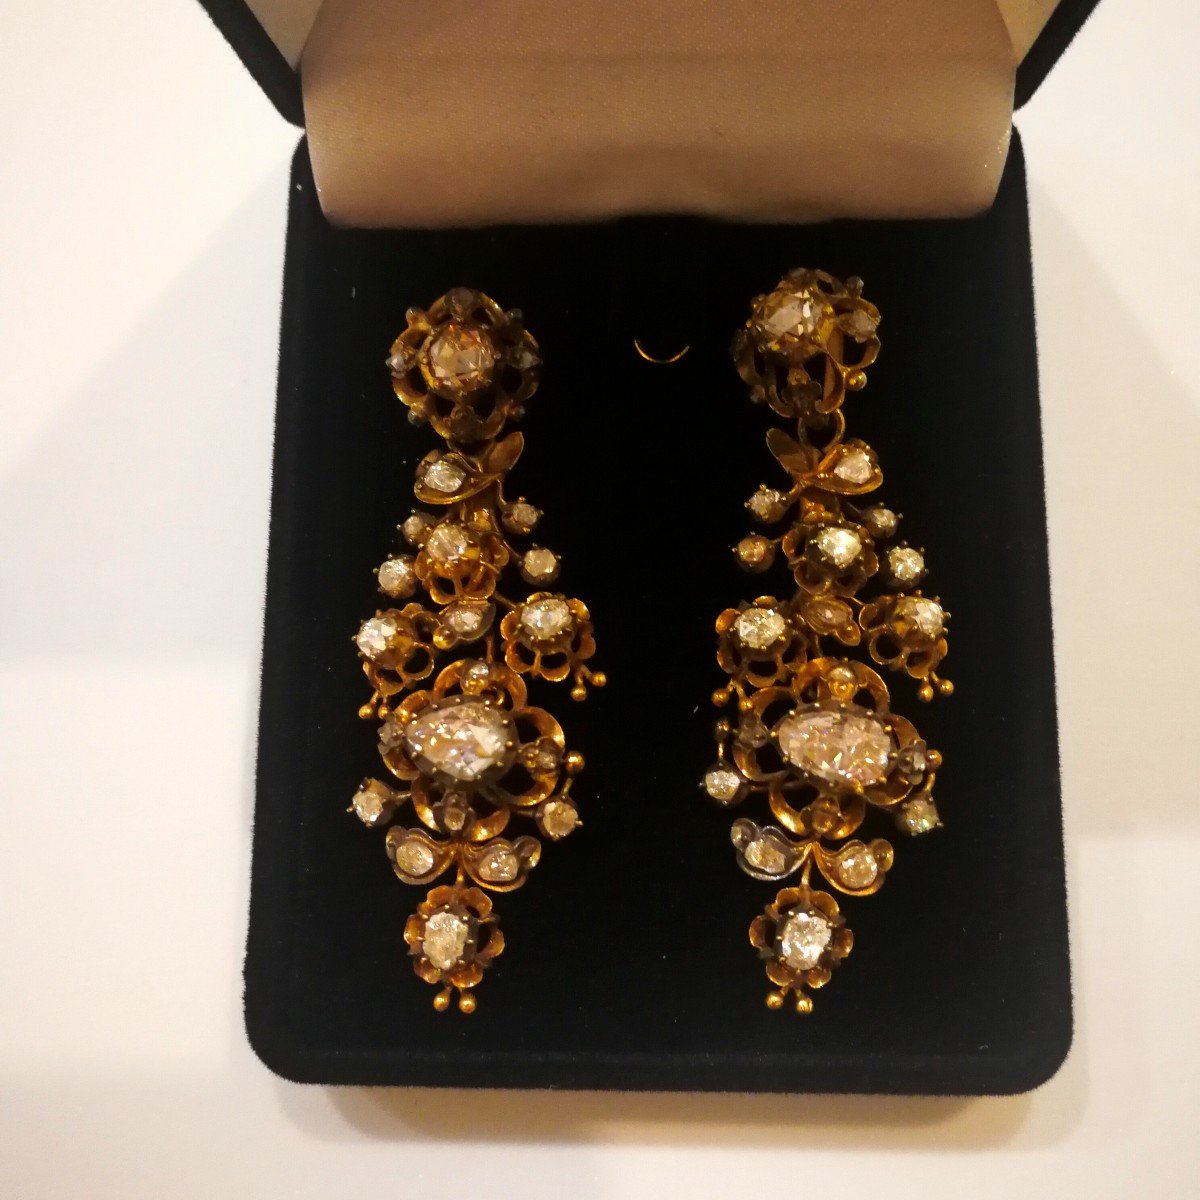 Spanish Drop Earrings In Gold And Diamonds, Mid-19th Century.